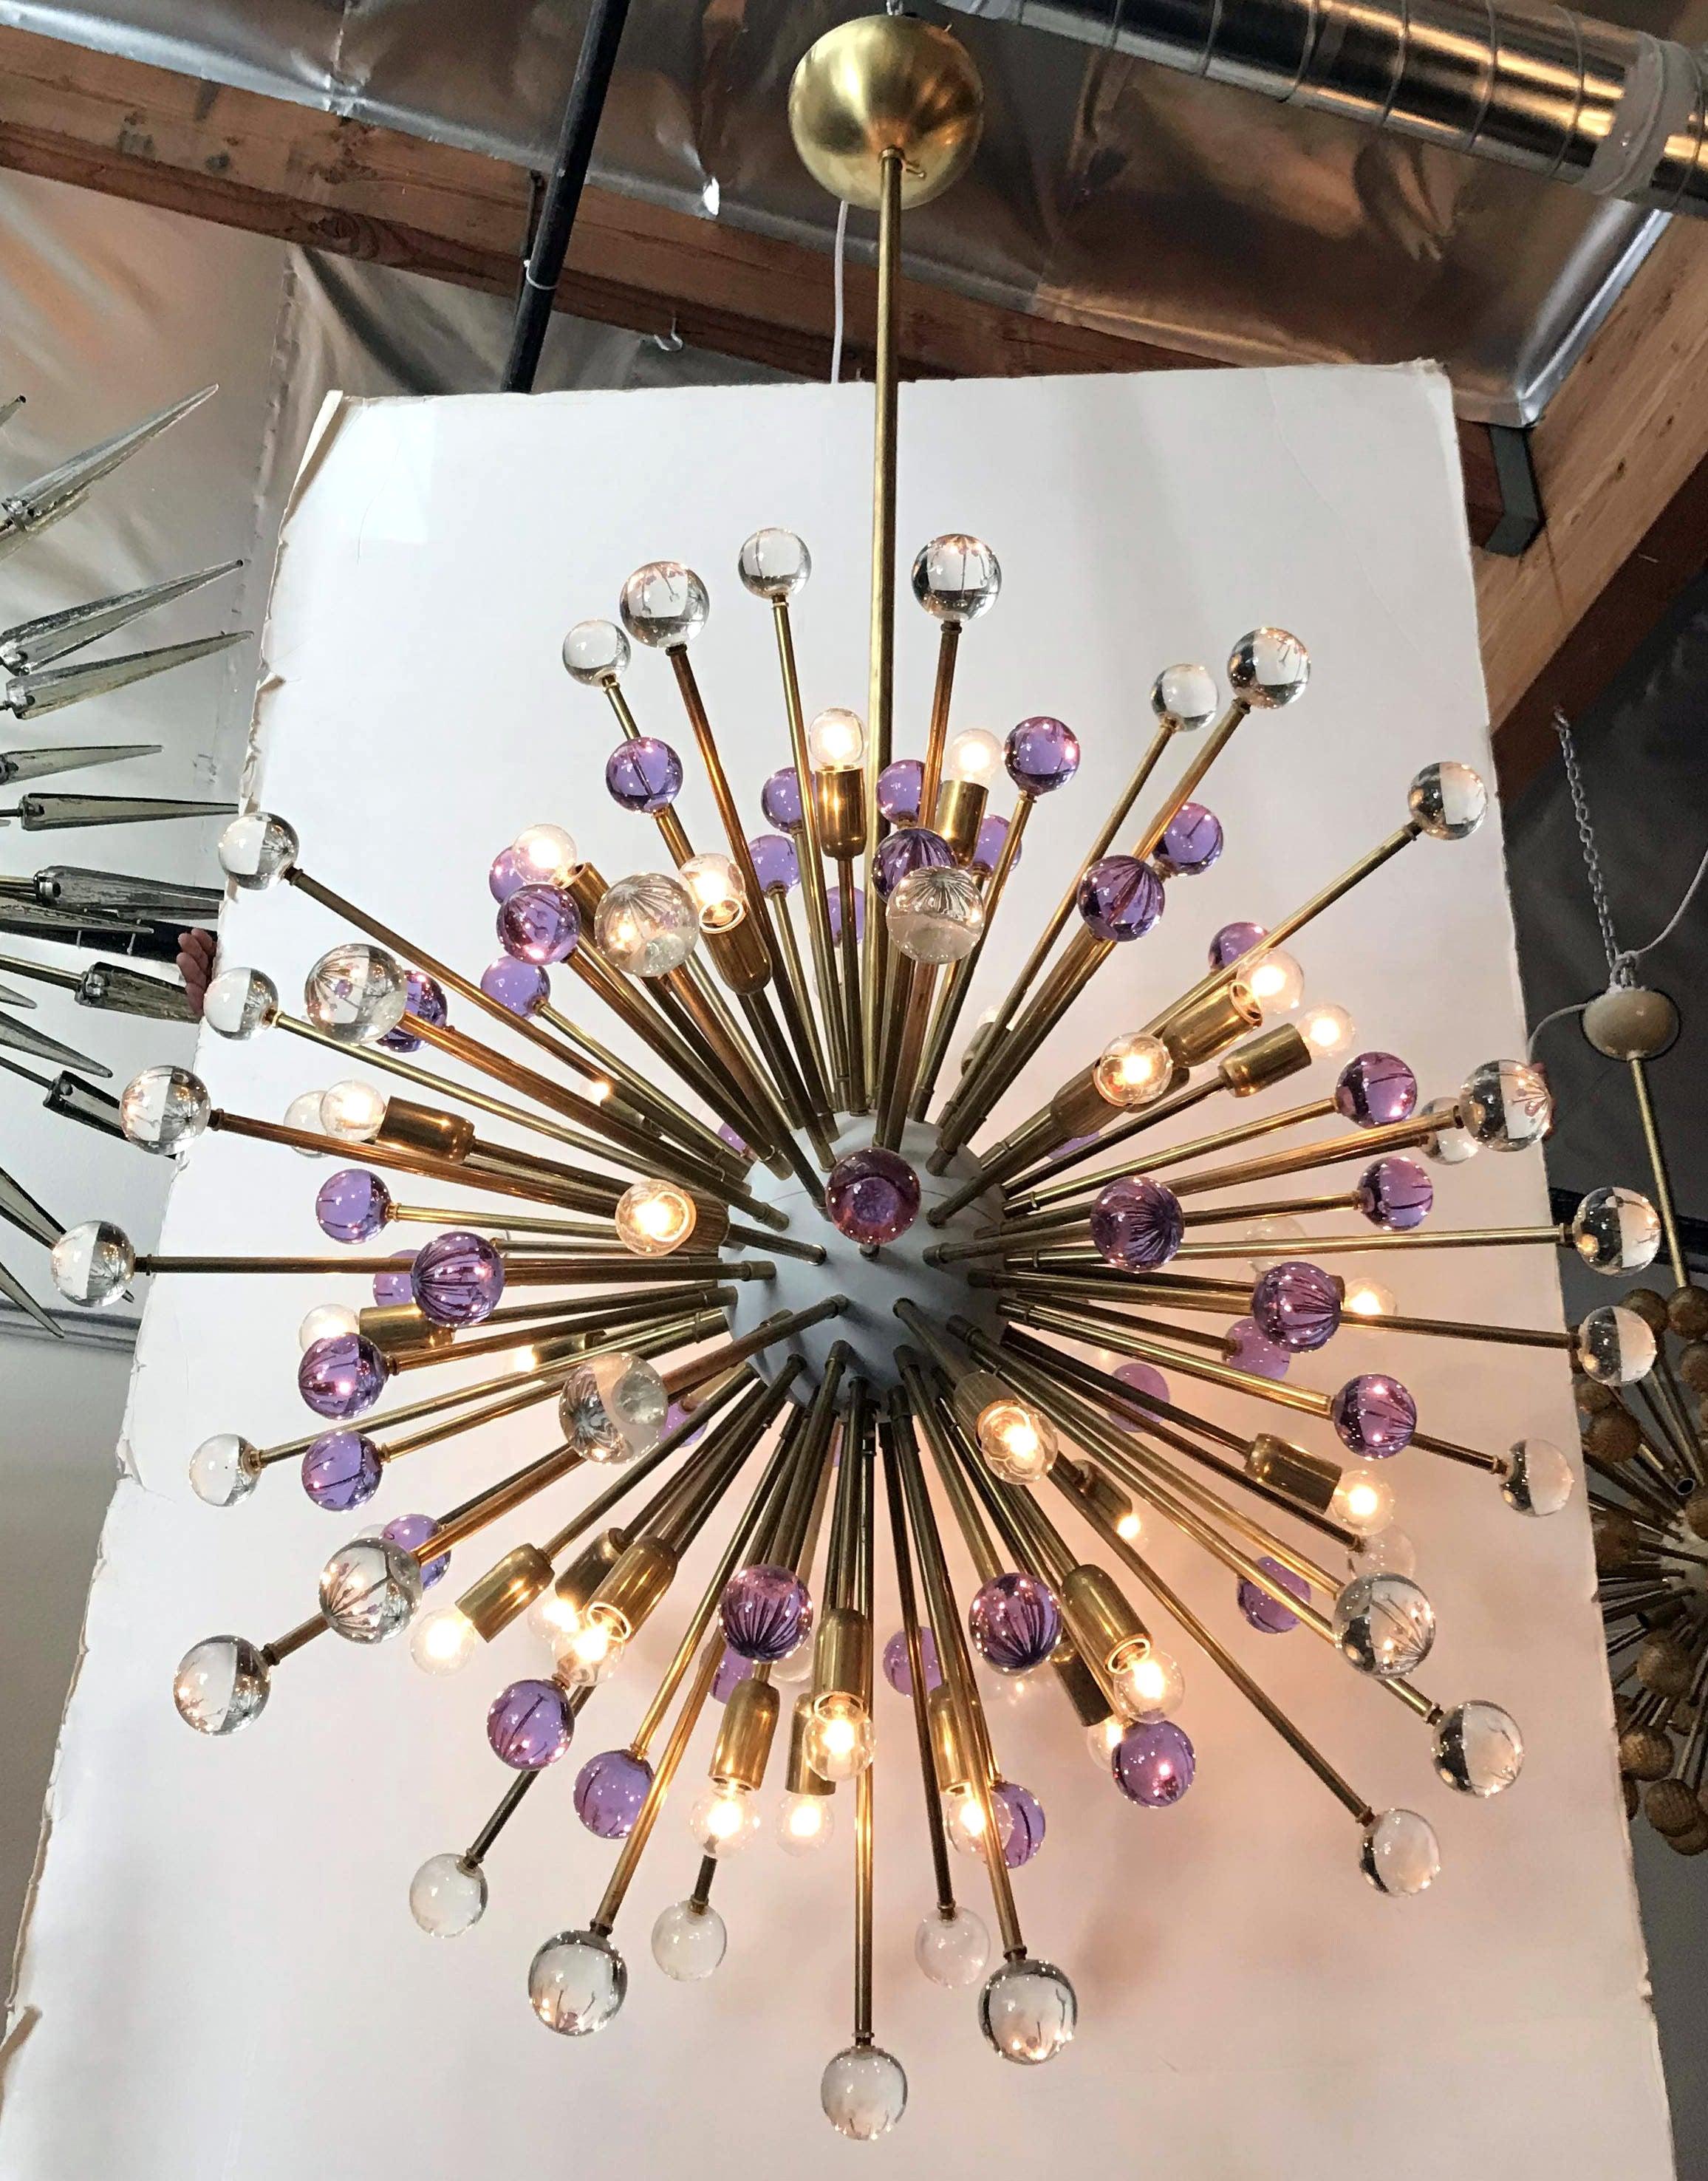 Italian modern Sputnik chandelier with hand blown clear and purple Murano glass spheres, mounted on natural brass frames with white enameled centre / designed by Fabio Bergomi for Fabio Ltd, made in Italy
30-light / E12 or E14 type / max 40 W